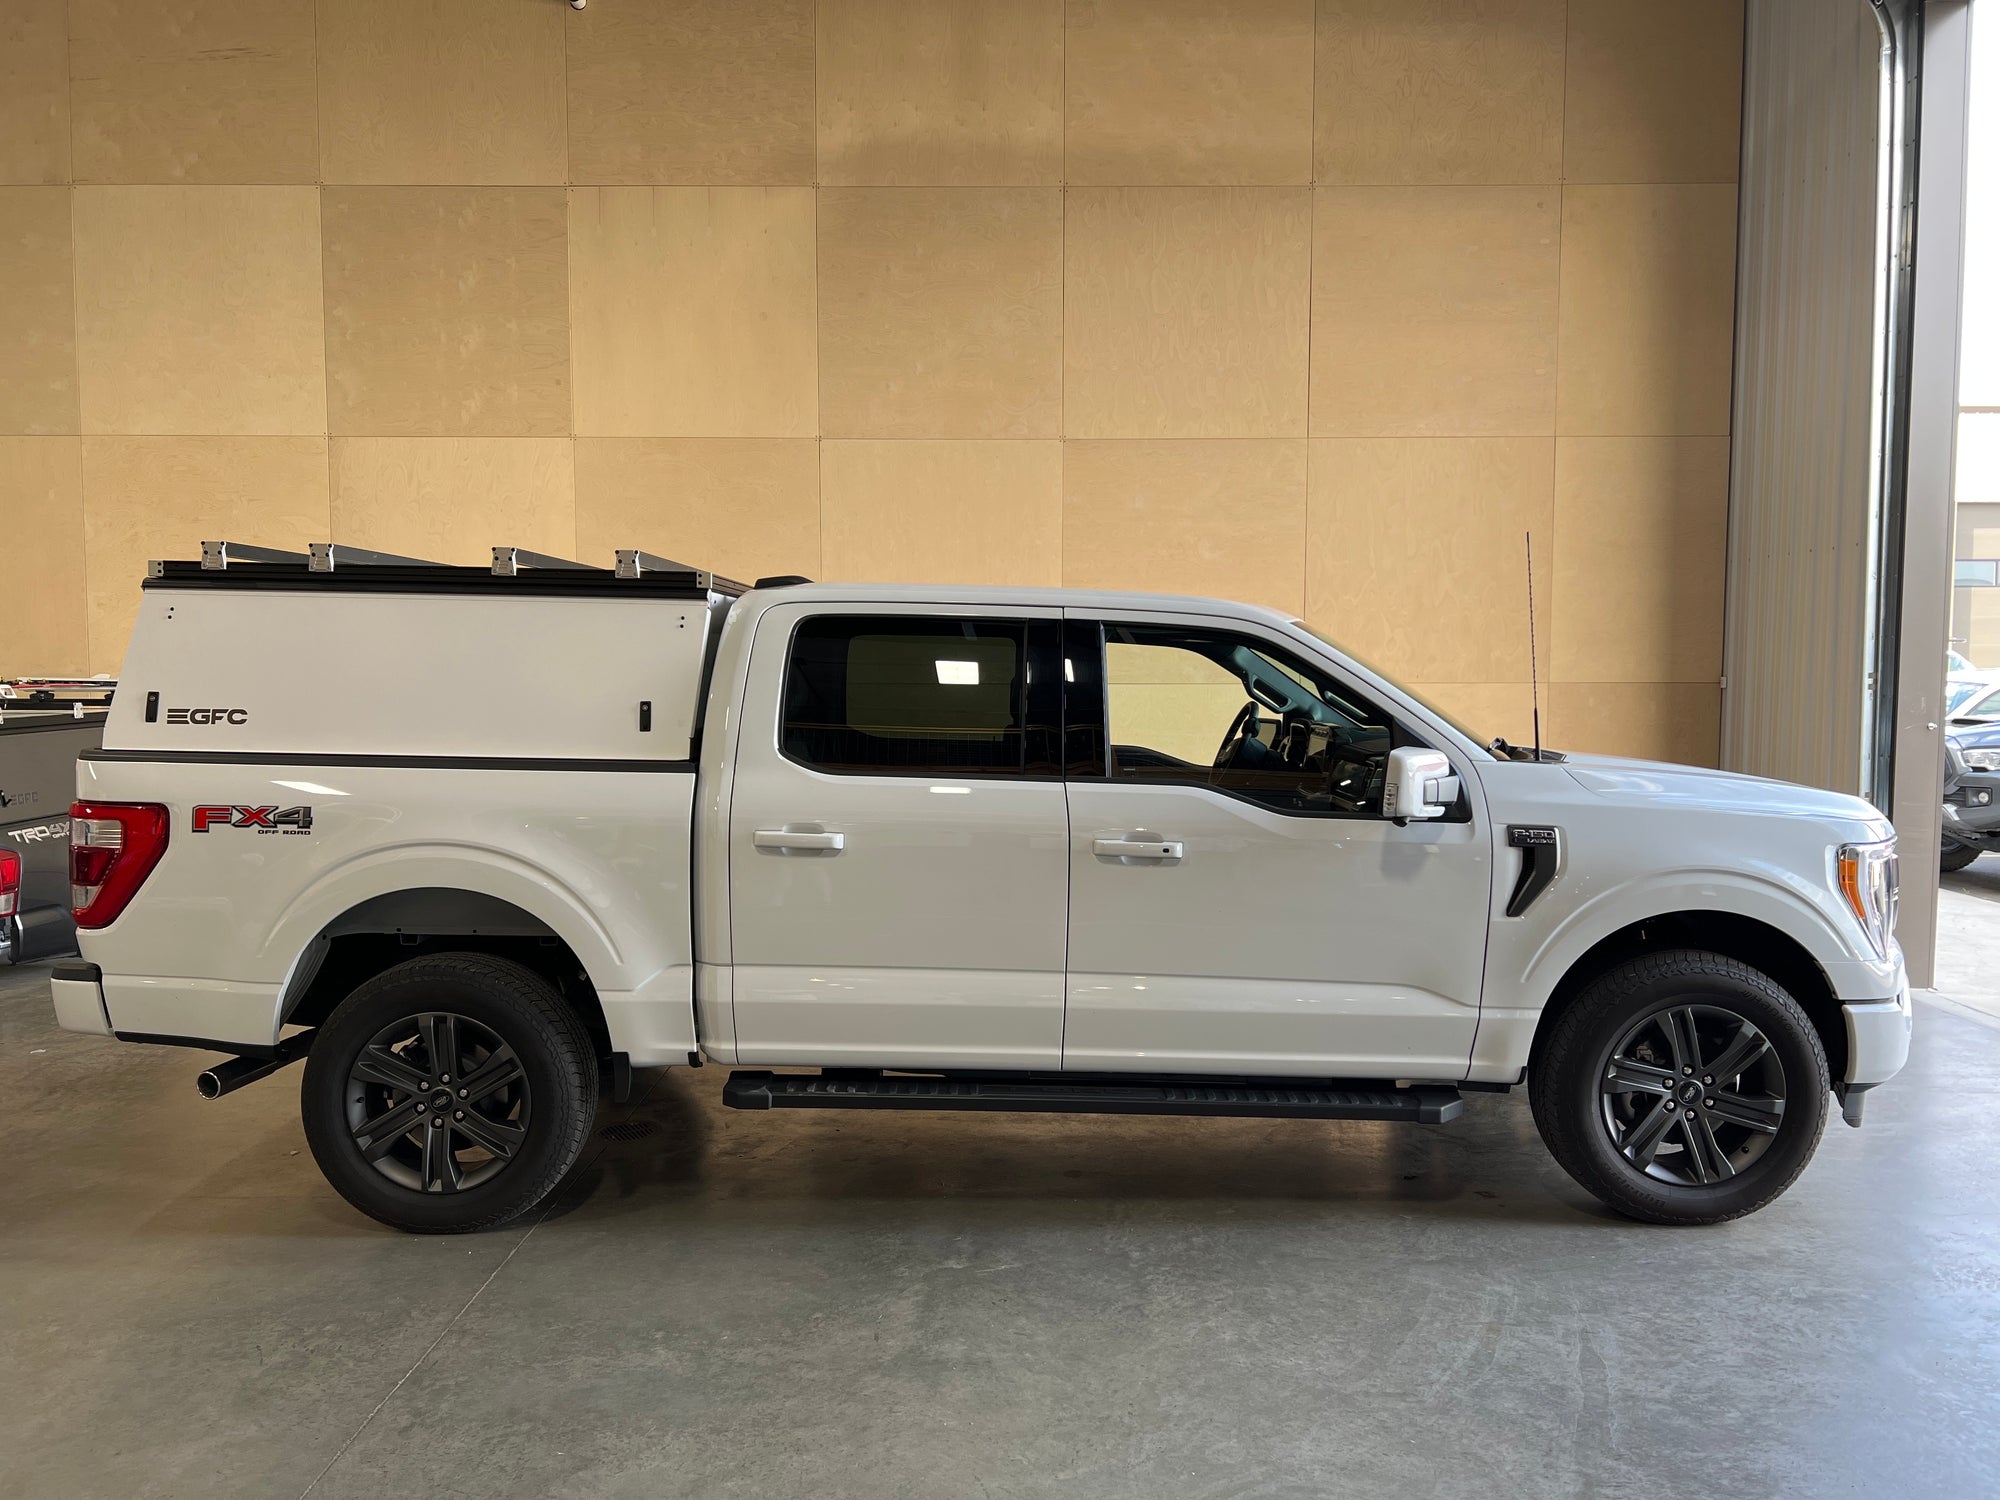 2023 Ford F150 Topper - Build #364